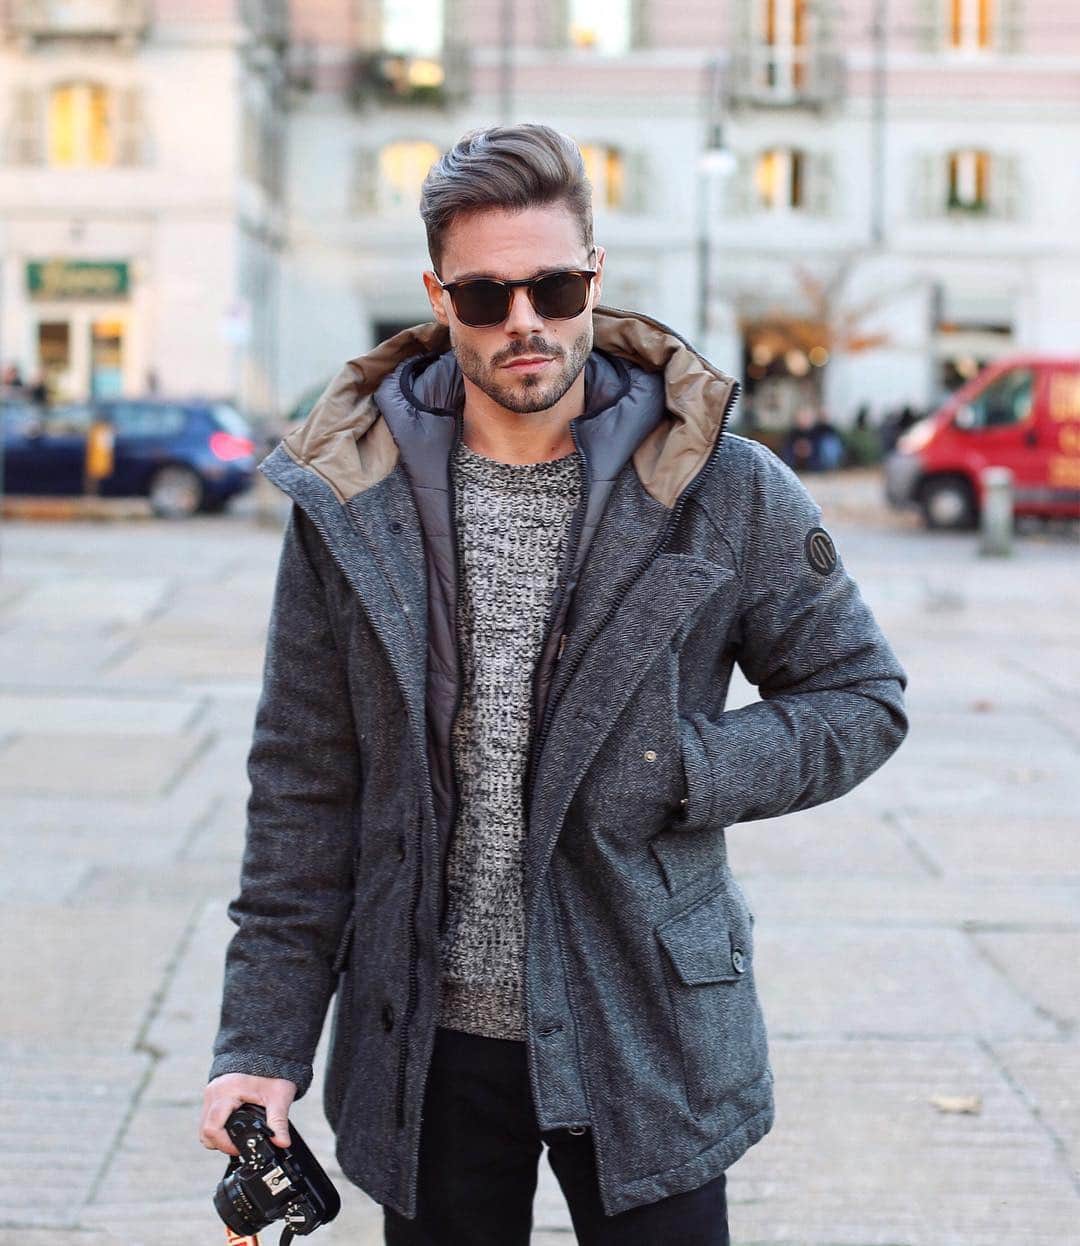 Stefano Trattoのインスタグラム：「Spending the day around Torino! Have a nice day guys 😎! Staying warm with @adhoc.official  #theboldparka  #outerwear #adhocformovingpeople」